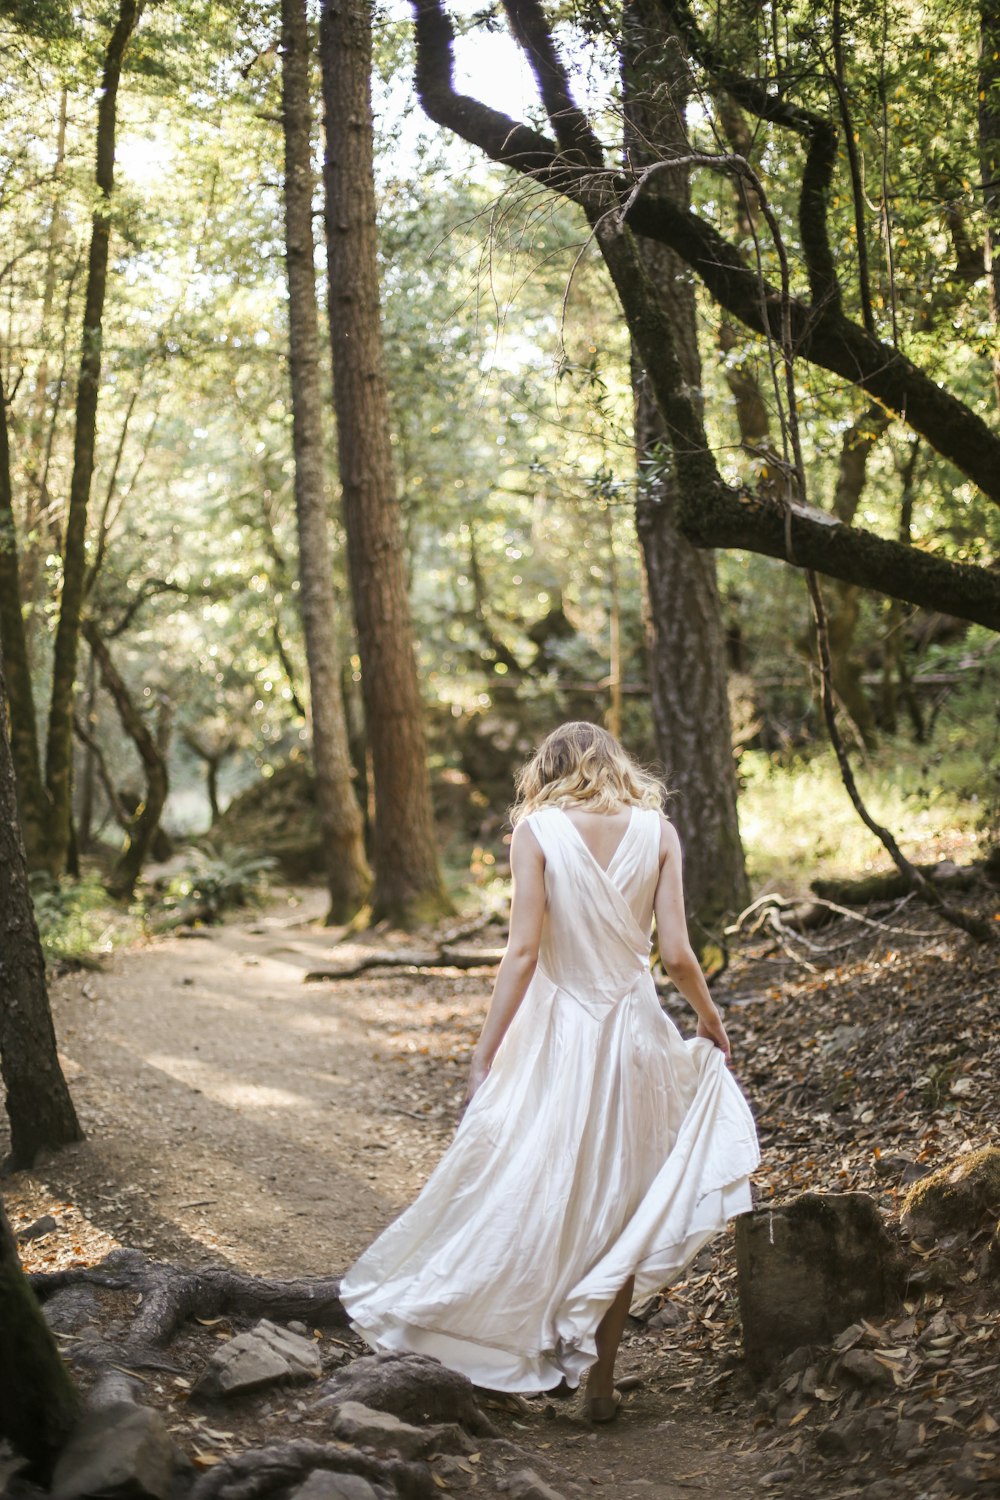 woman in white dress standing on brown soil surrounded by green trees during daytime